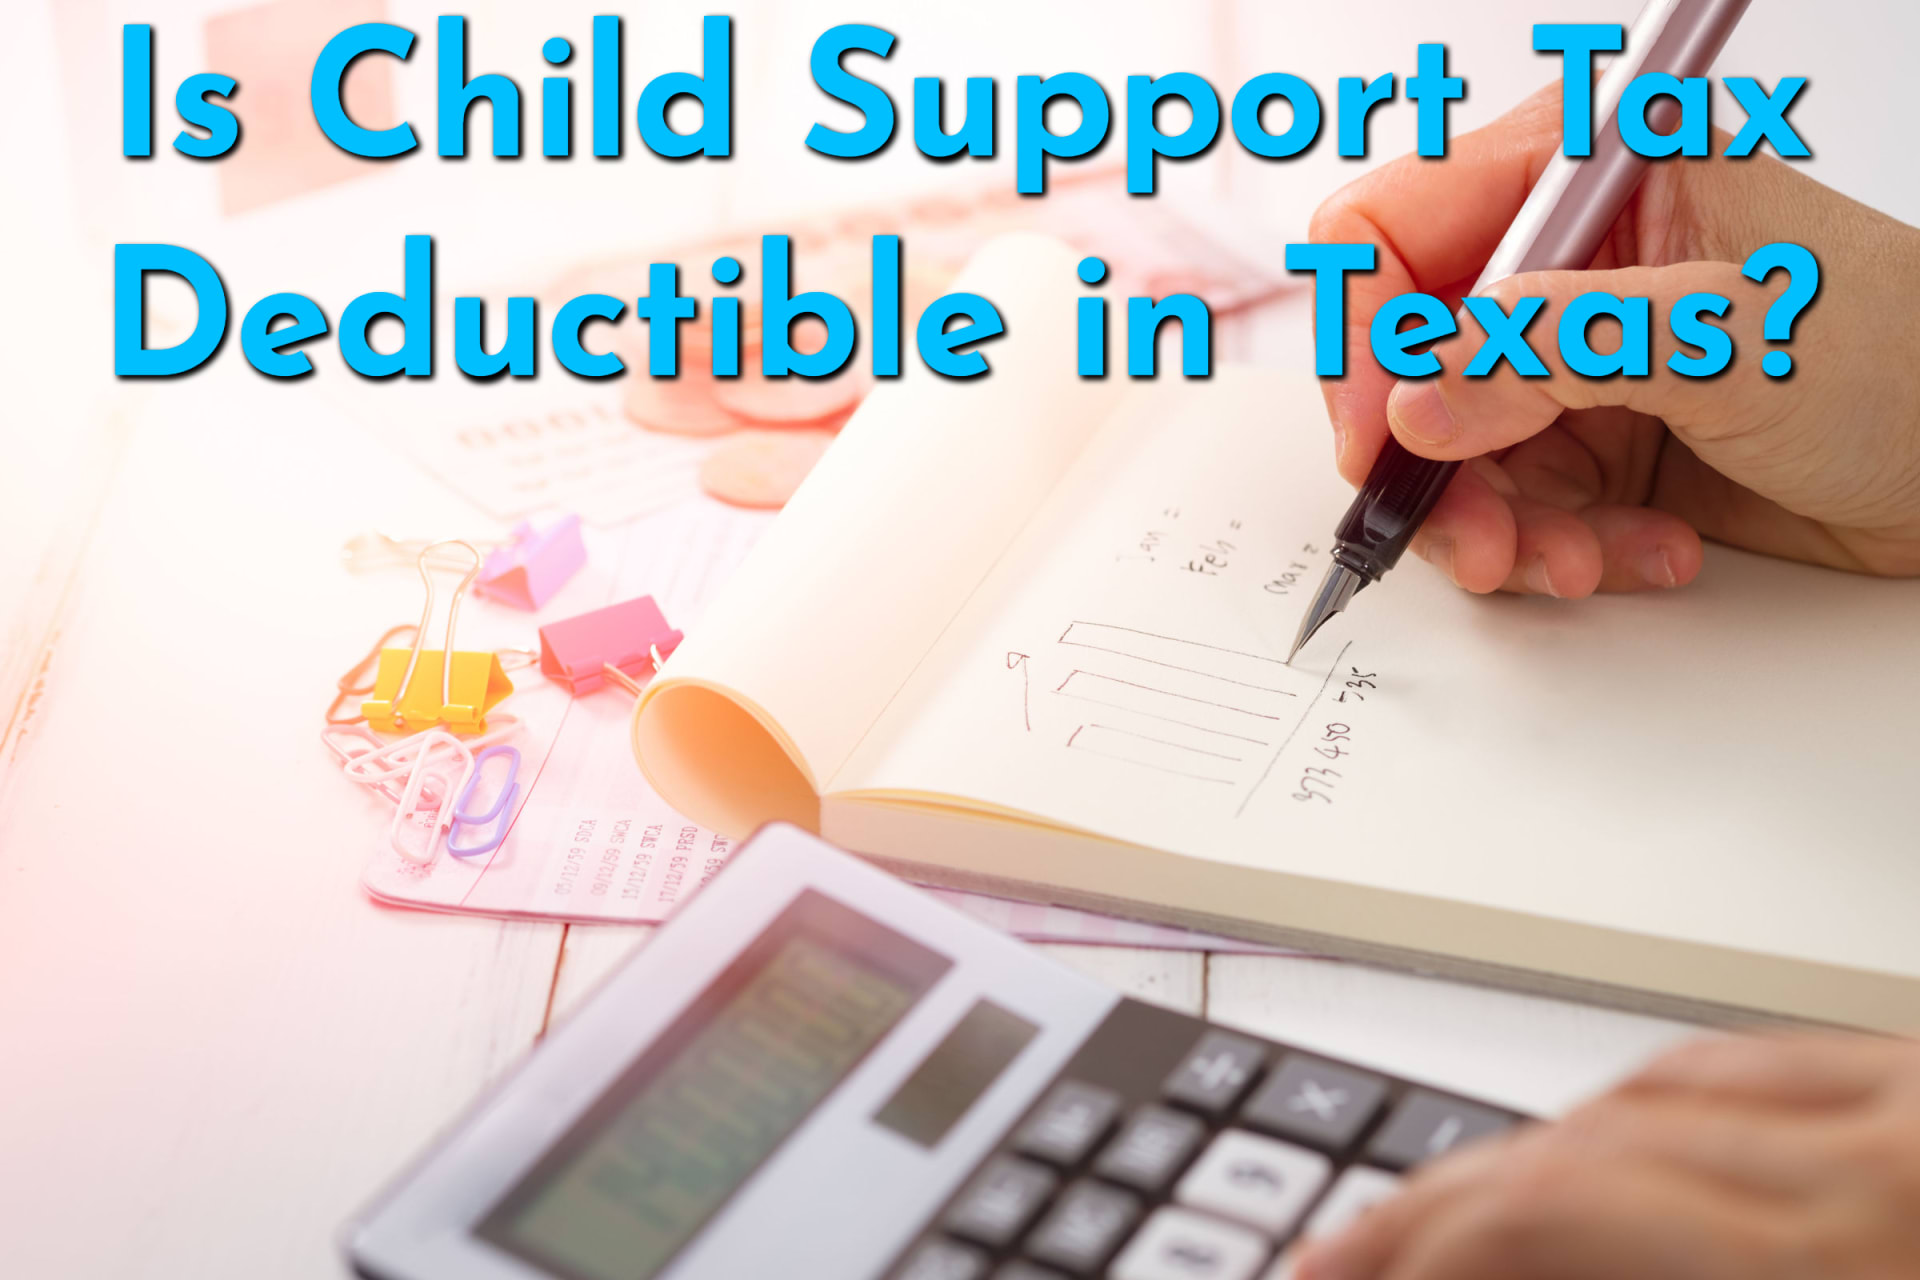 Is Child Support Tax Deductible in Texas?